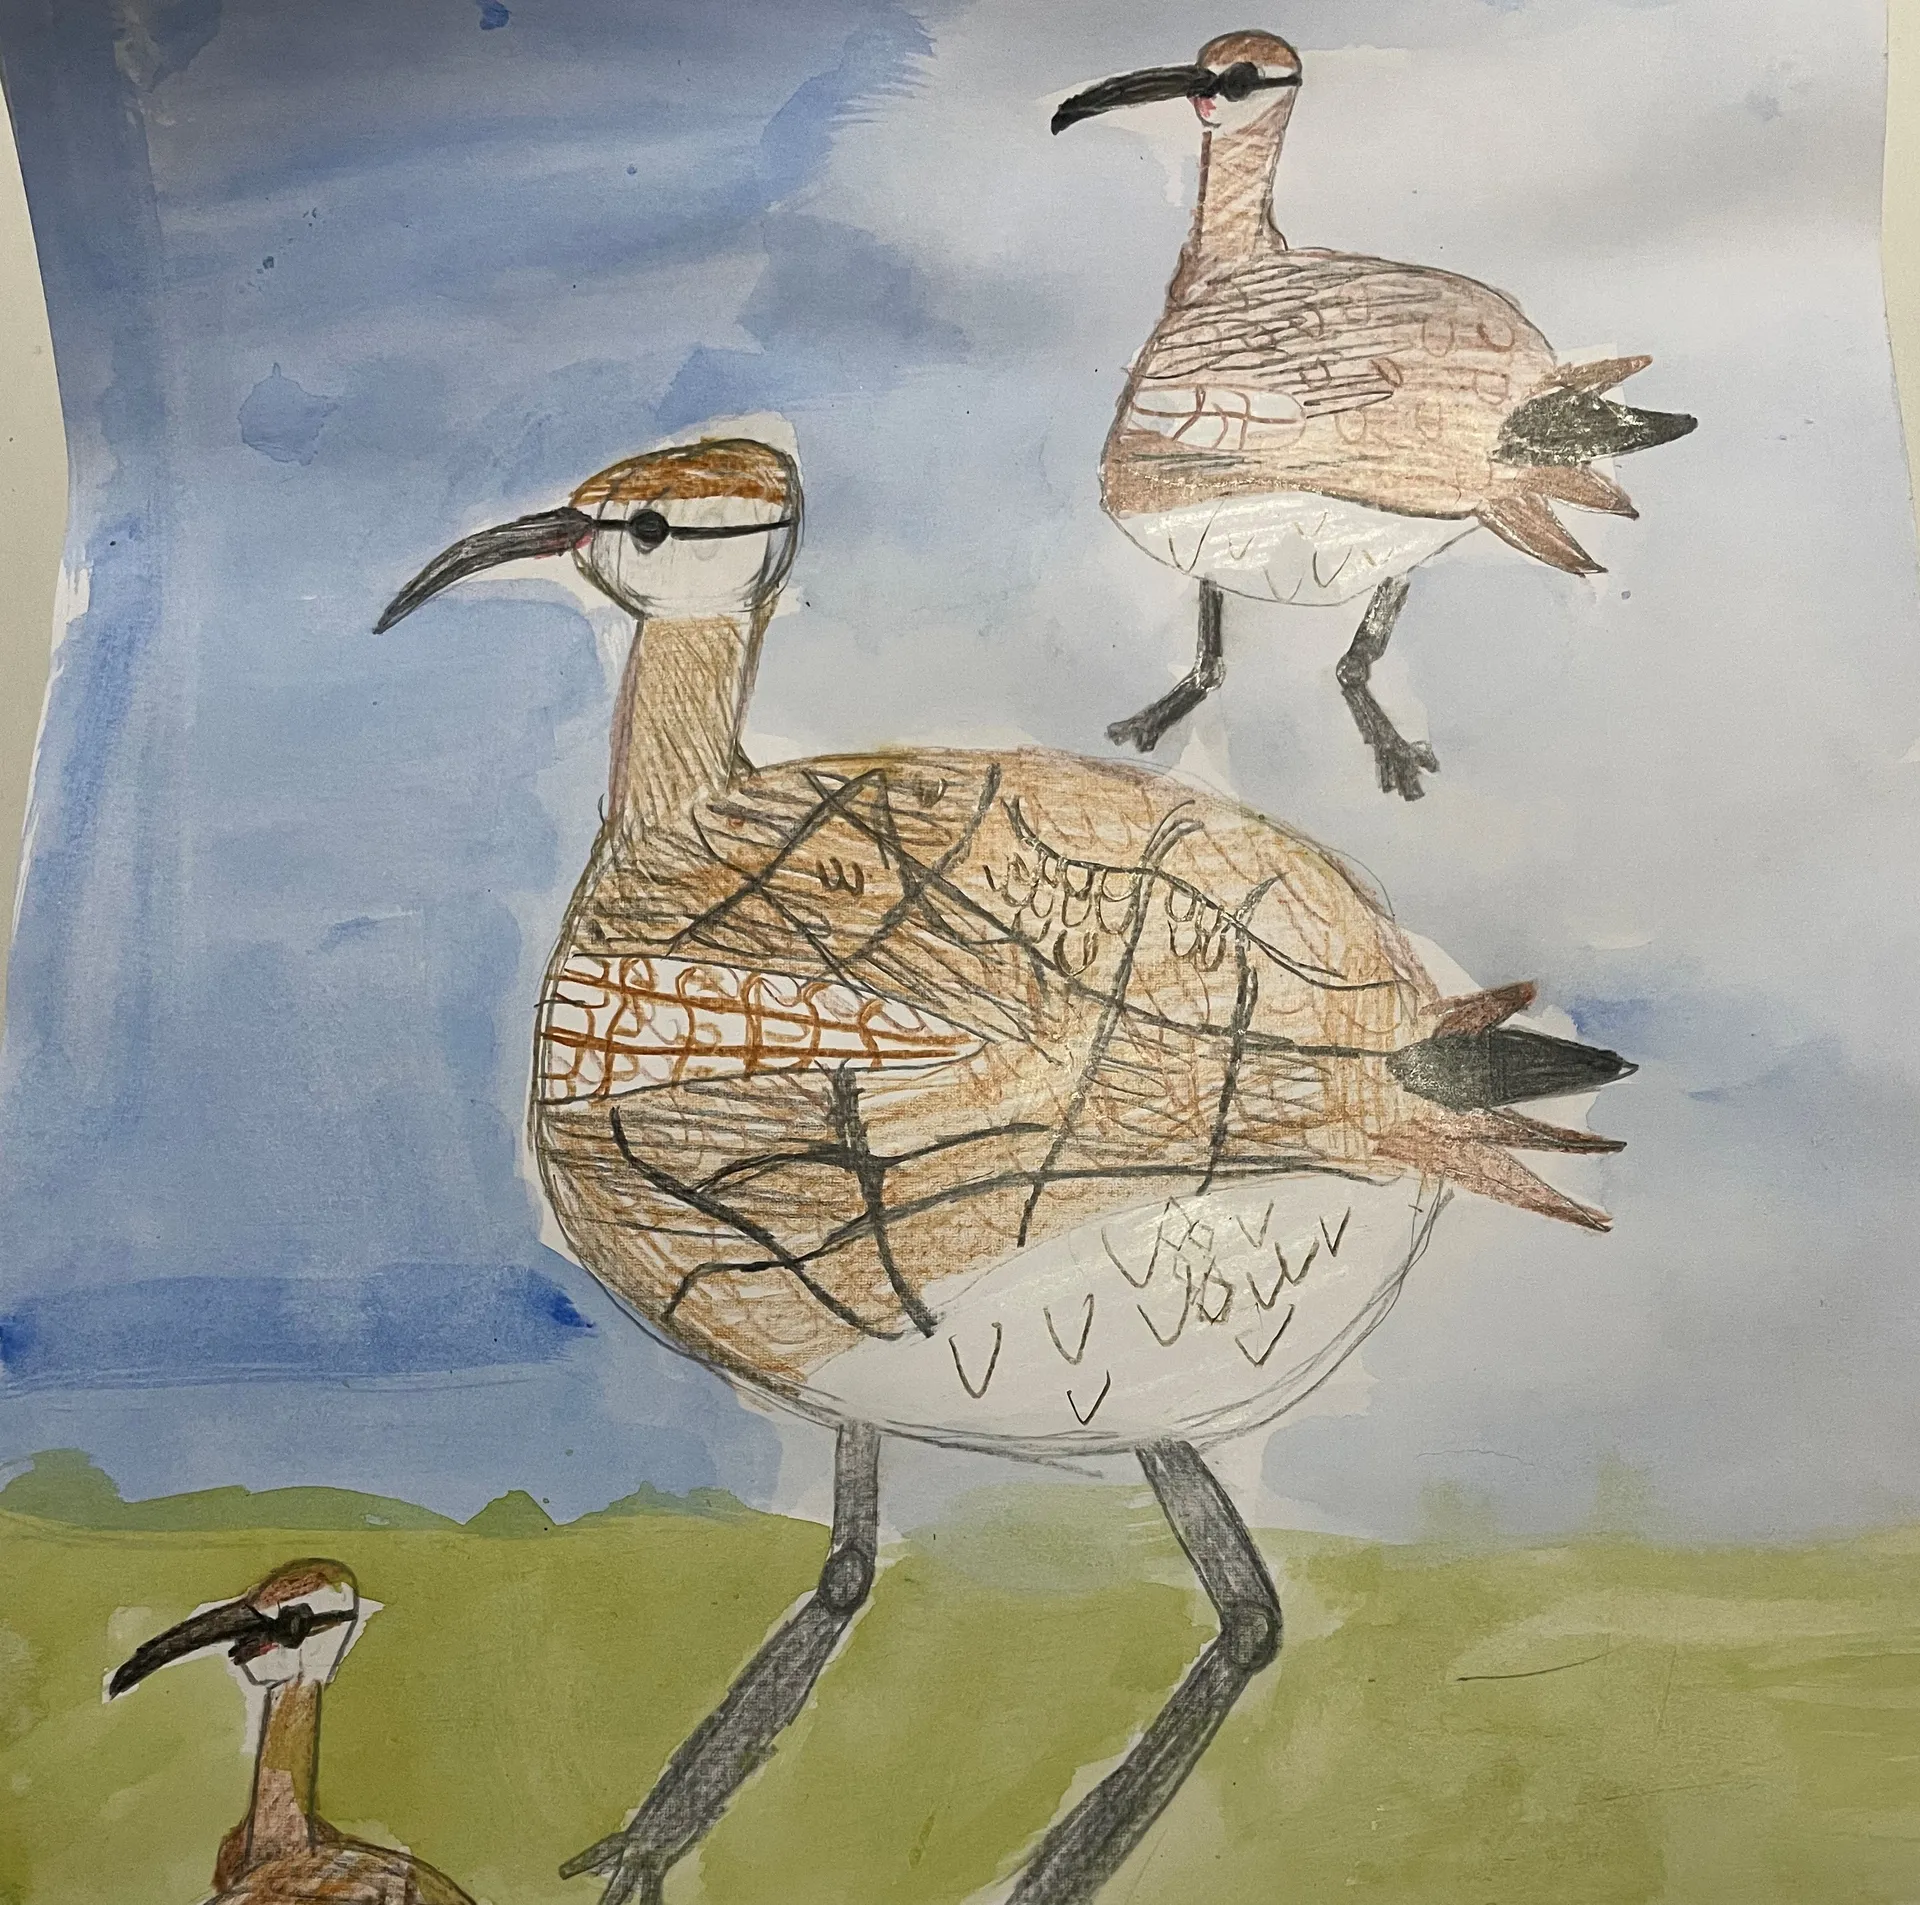 Under 8s Fauna winner “Wondrous Whimbrels” by Chloe R